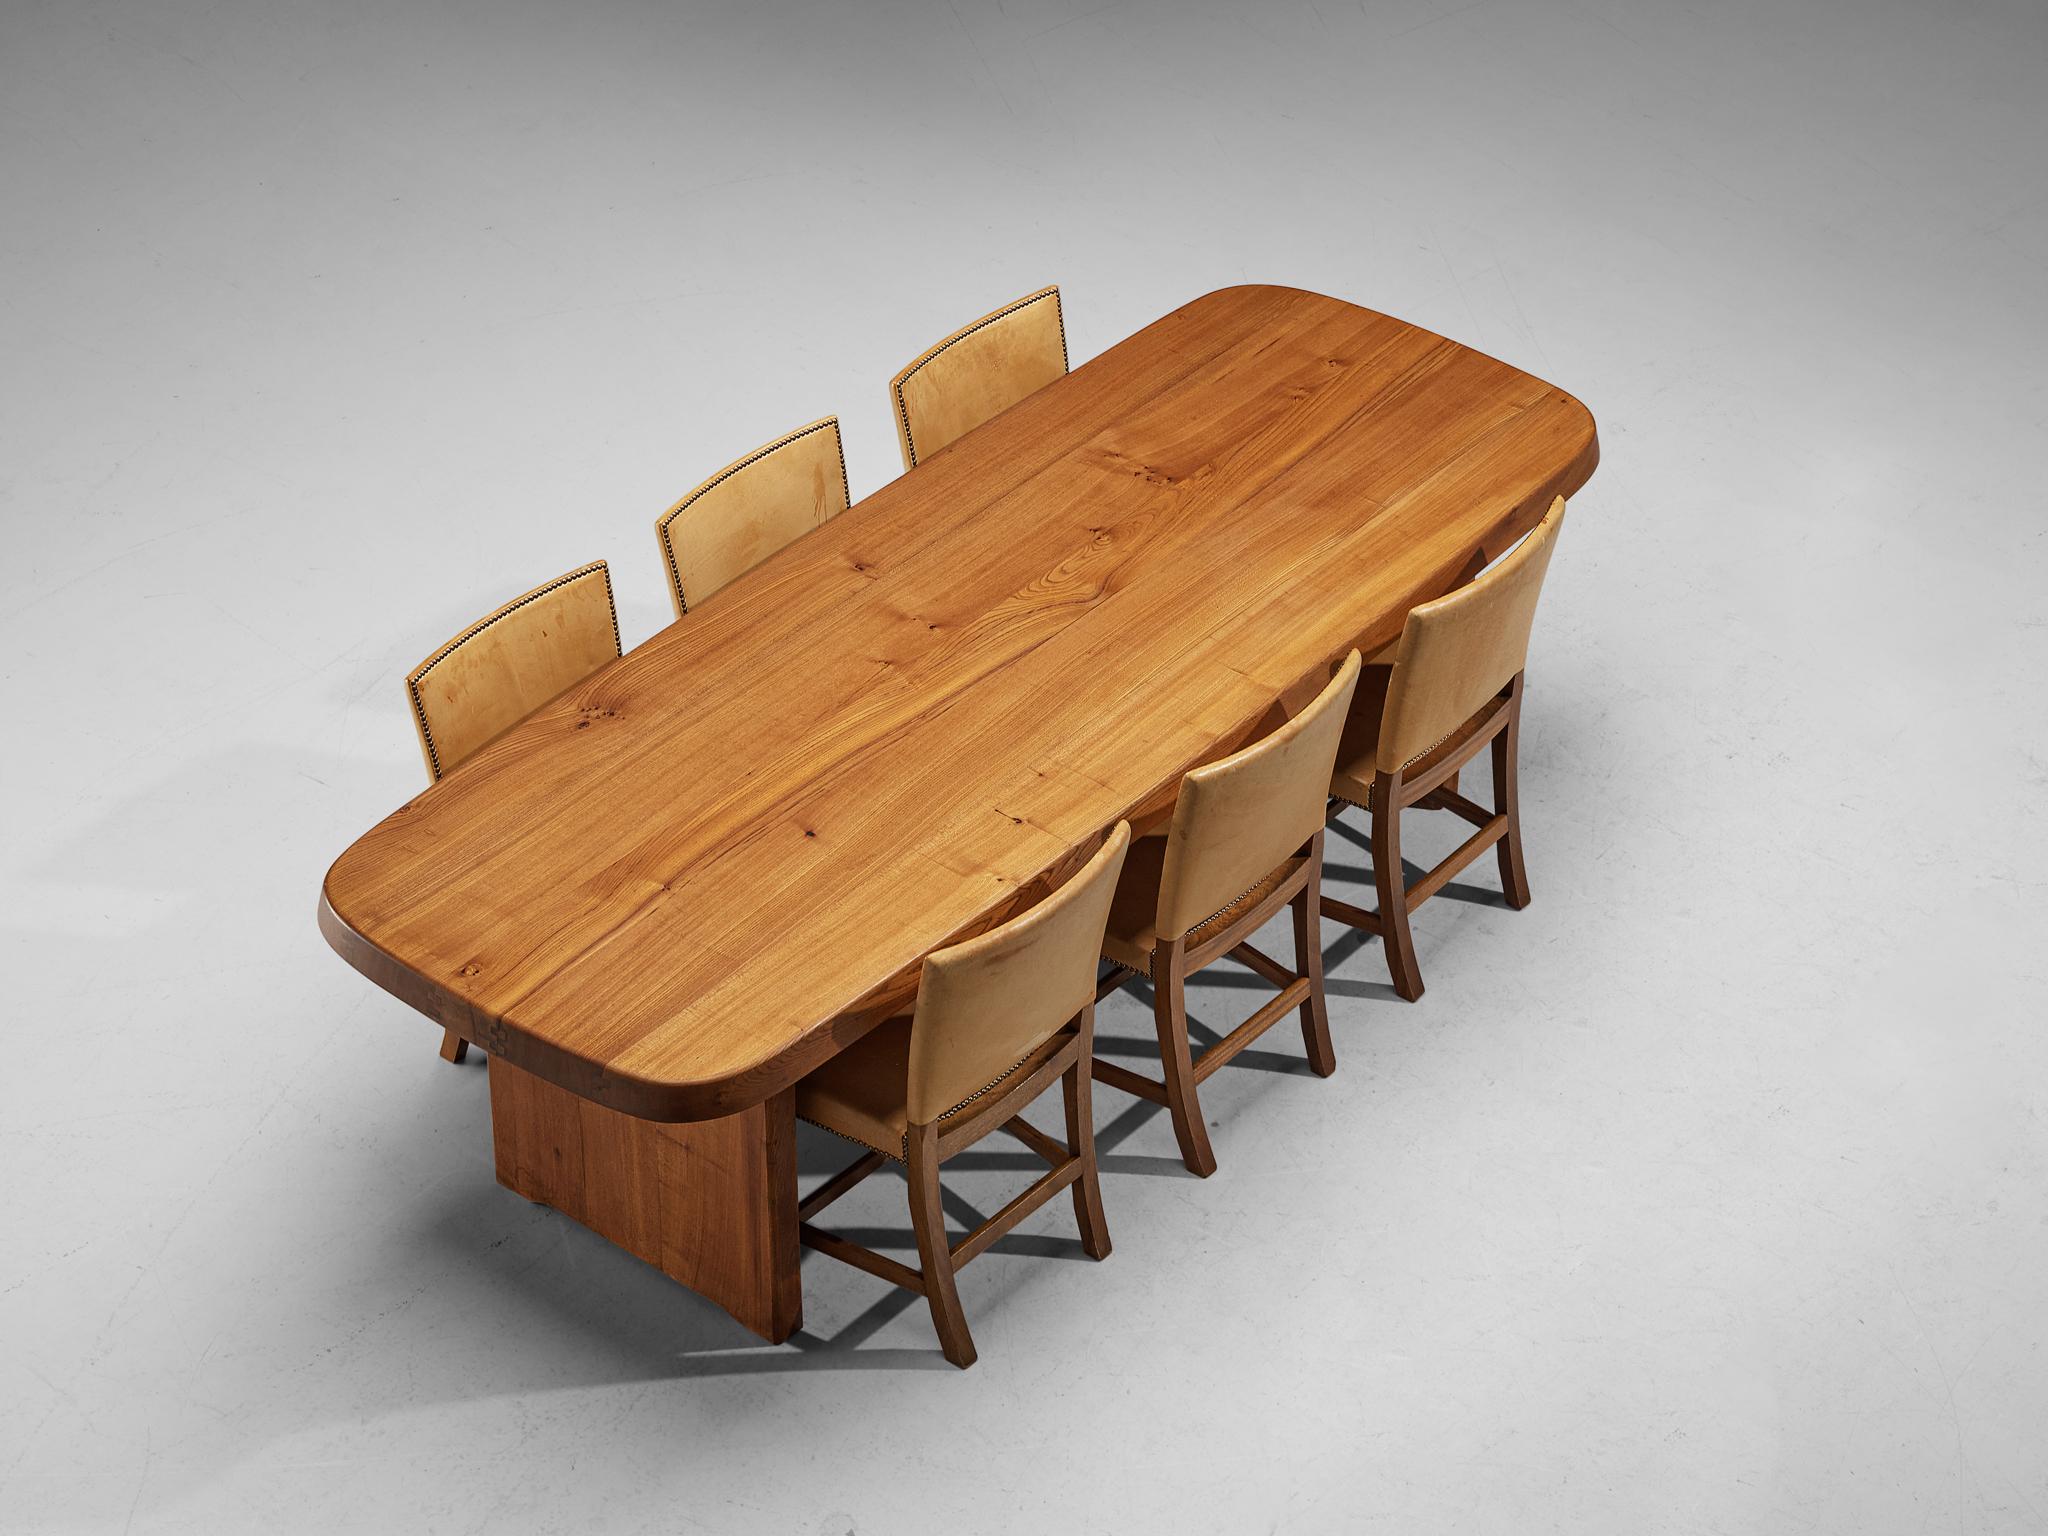 Pierre Chapo, dining table, model T20A, elmwood, France, 1970s.

This design is an early edition, created according to the original craft methodology of Pierre Chapo. The table is designed in 1972 when Pierre Chapo revisited the idea of the T14